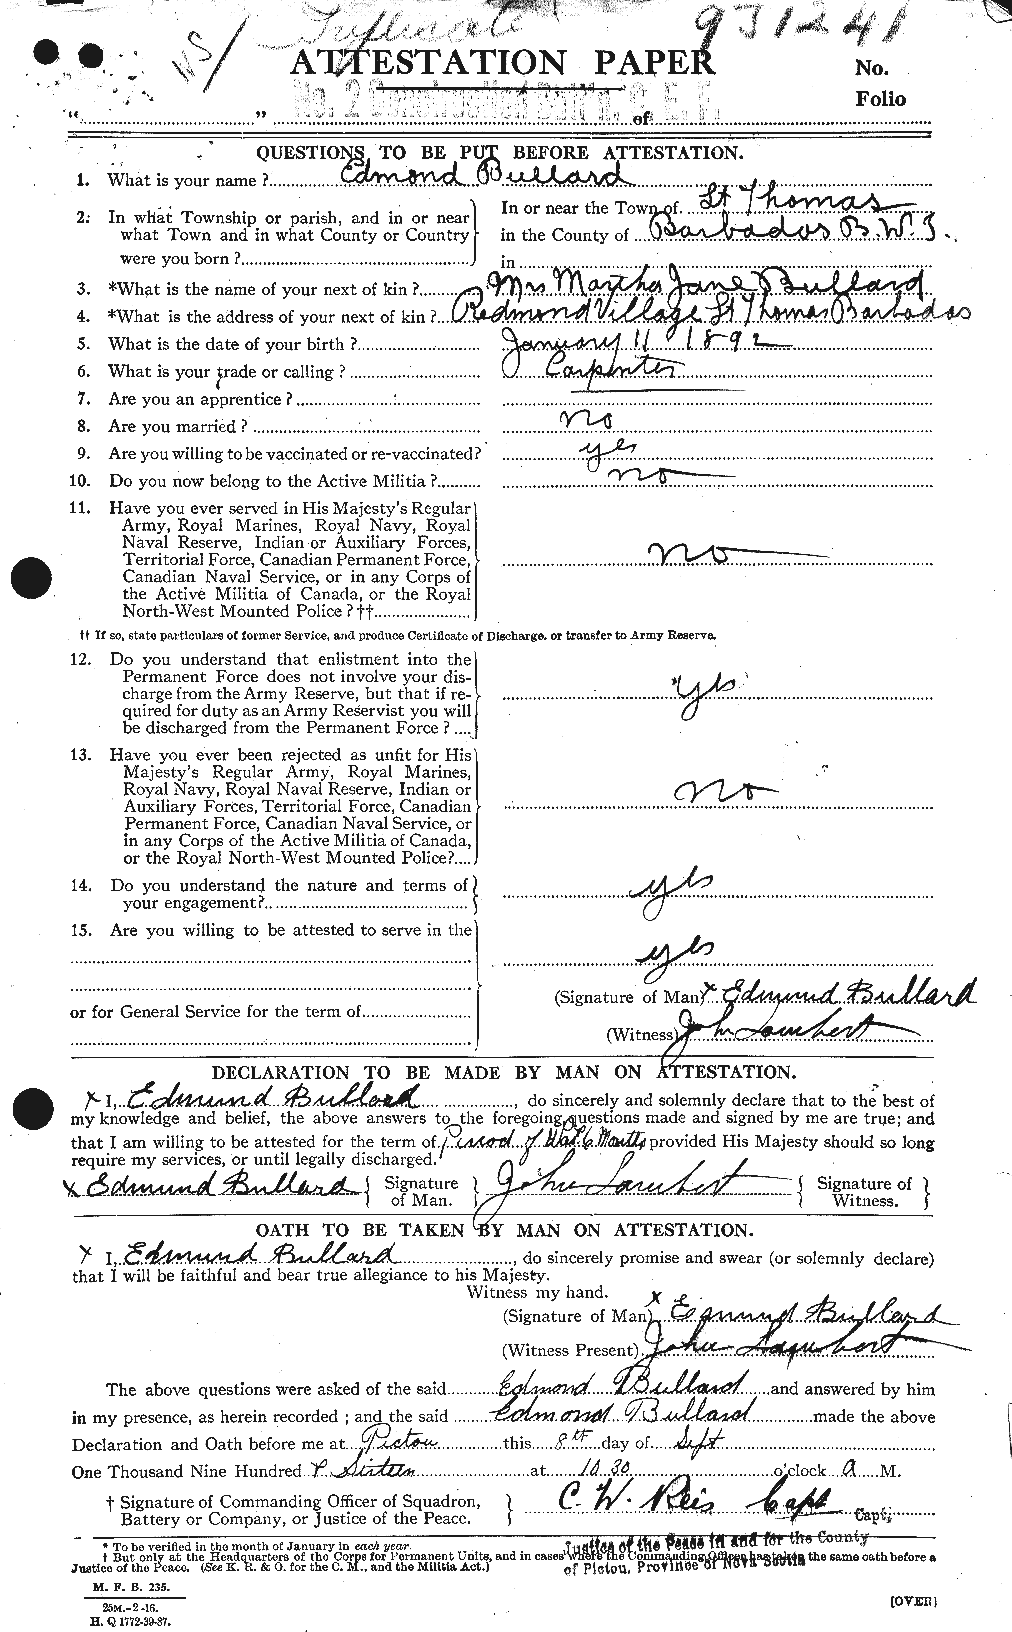 Personnel Records of the First World War - CEF 273466a